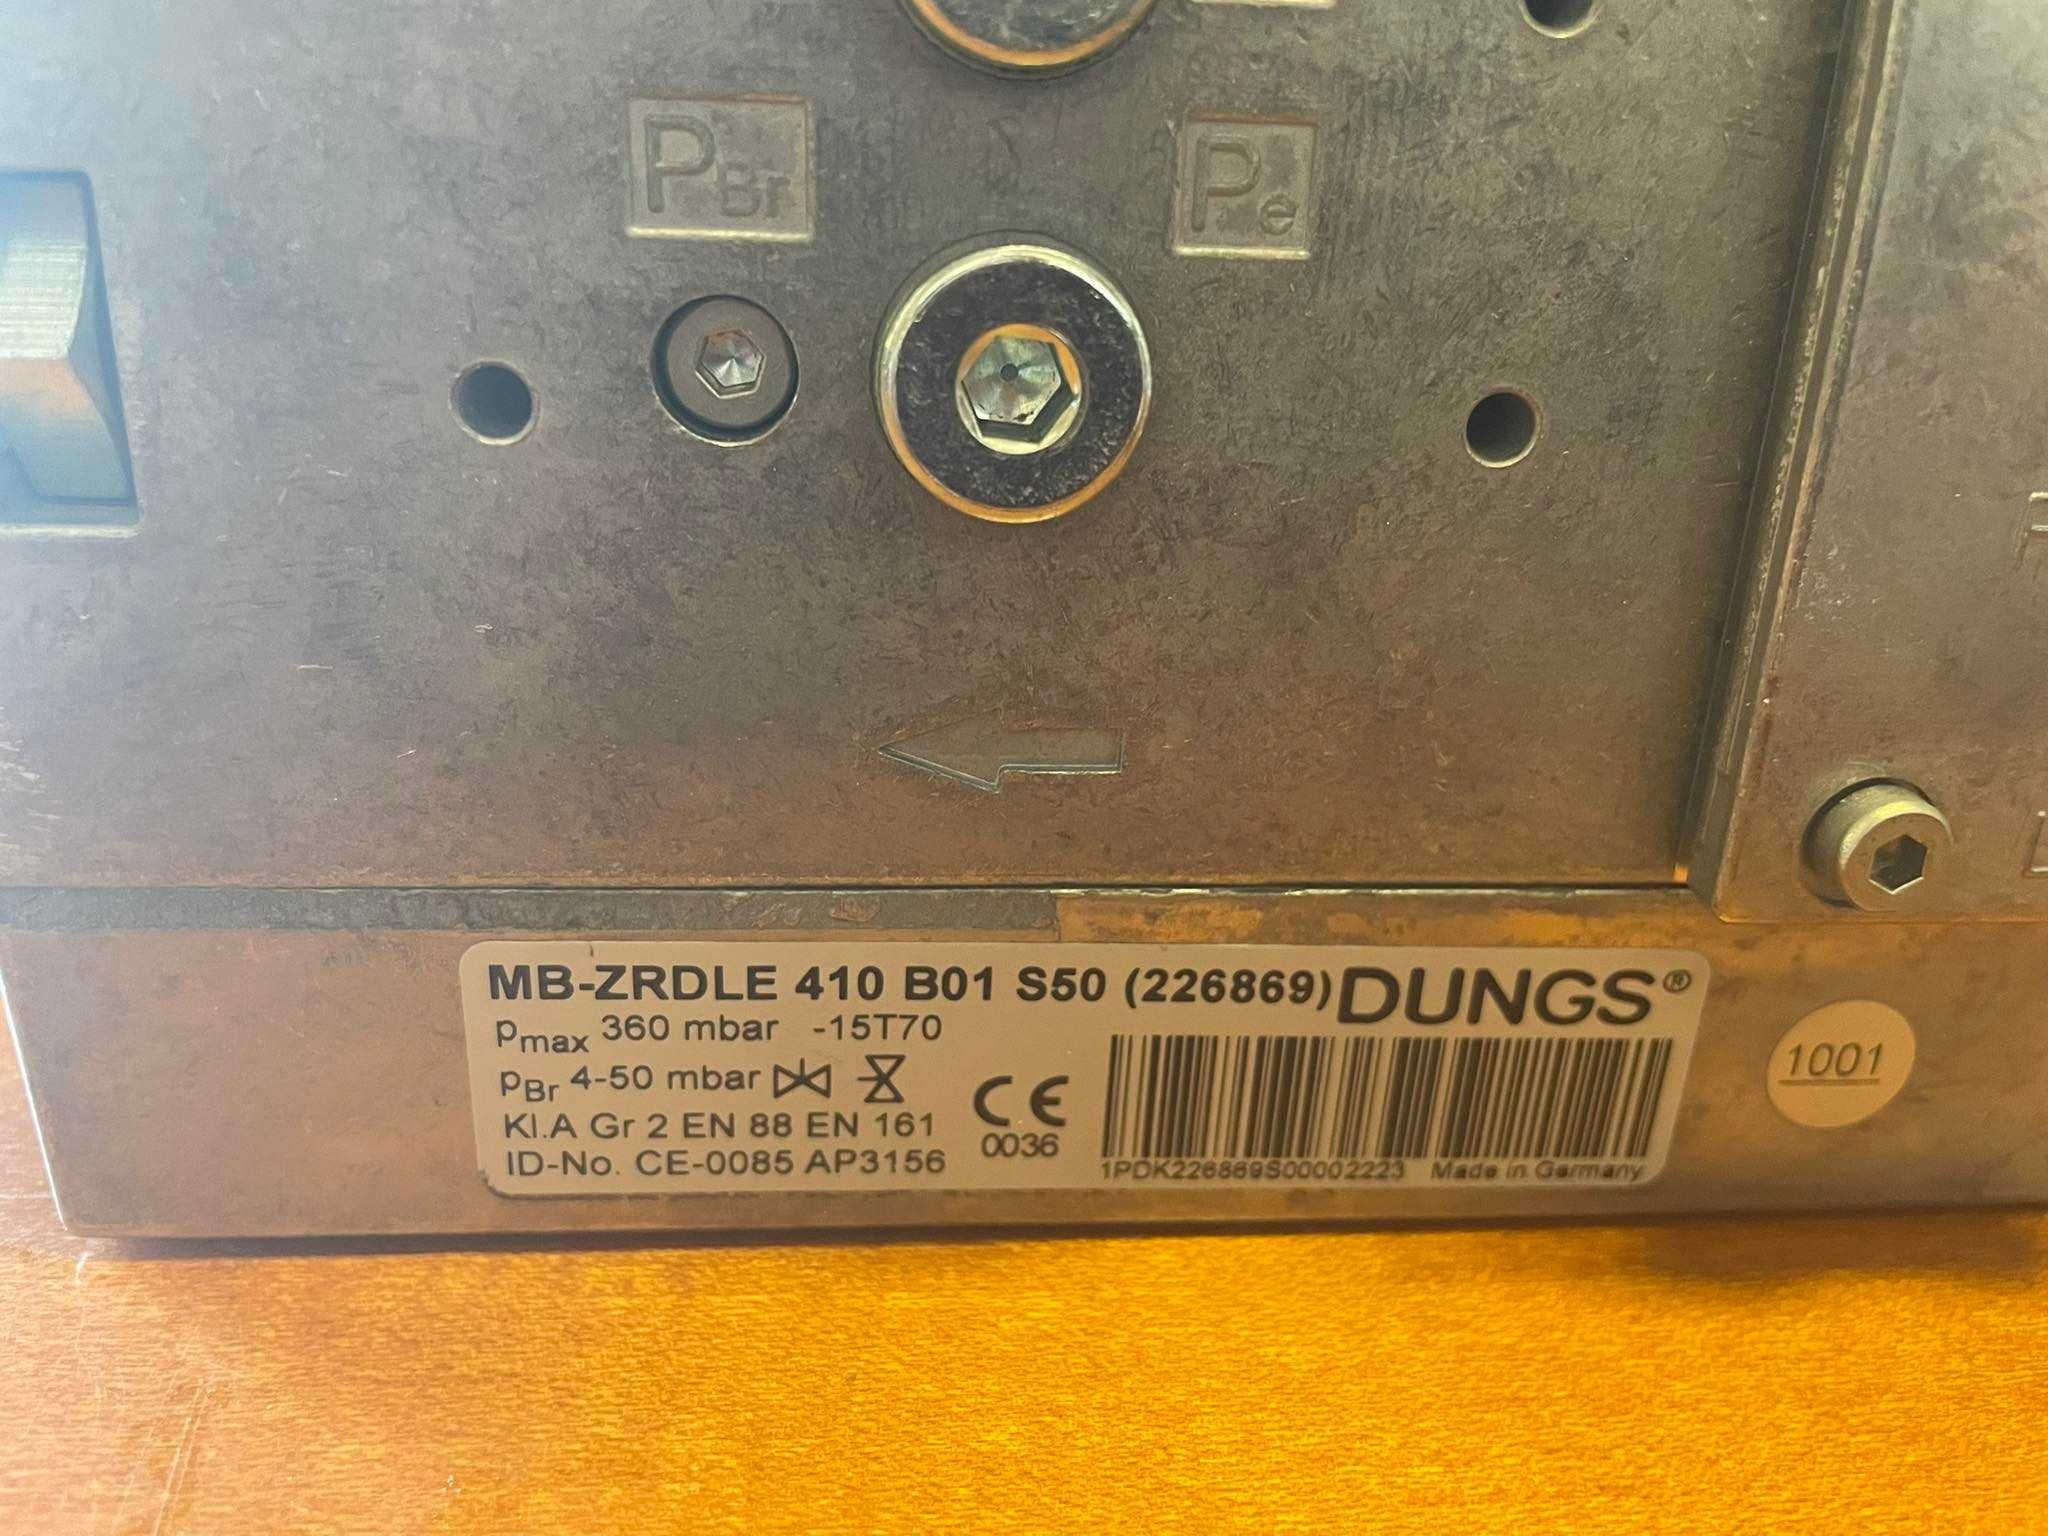 Dungs MB-ZRDLE 410 B01 S50